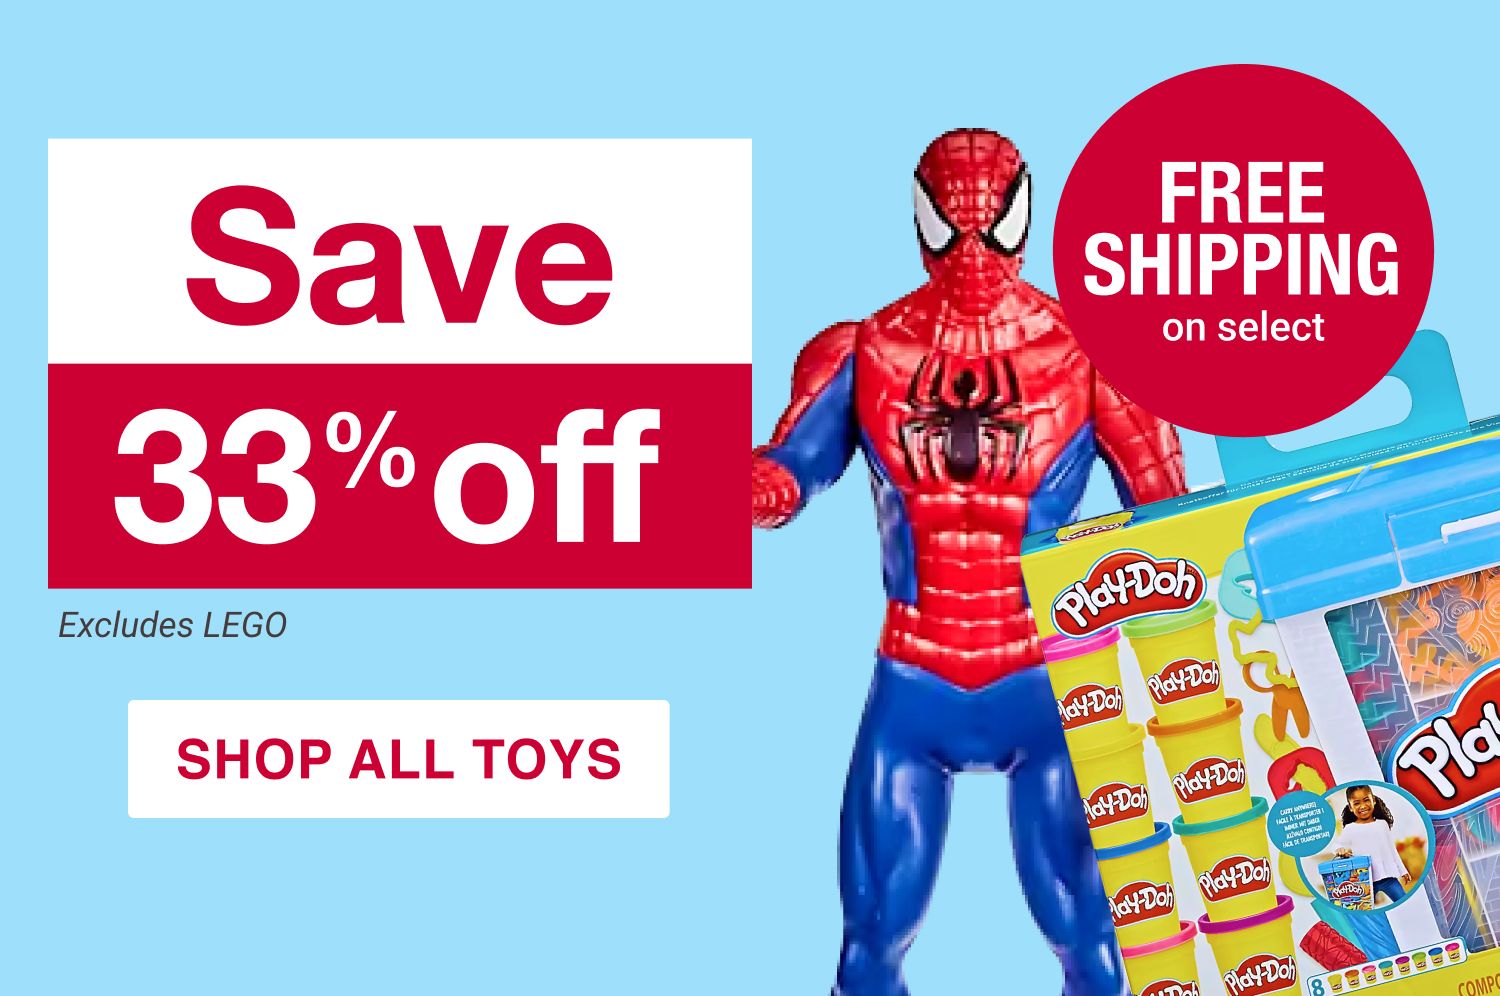 Toys category. Buy one get one 50% off. Play-doh and a Spider-Man action figure.